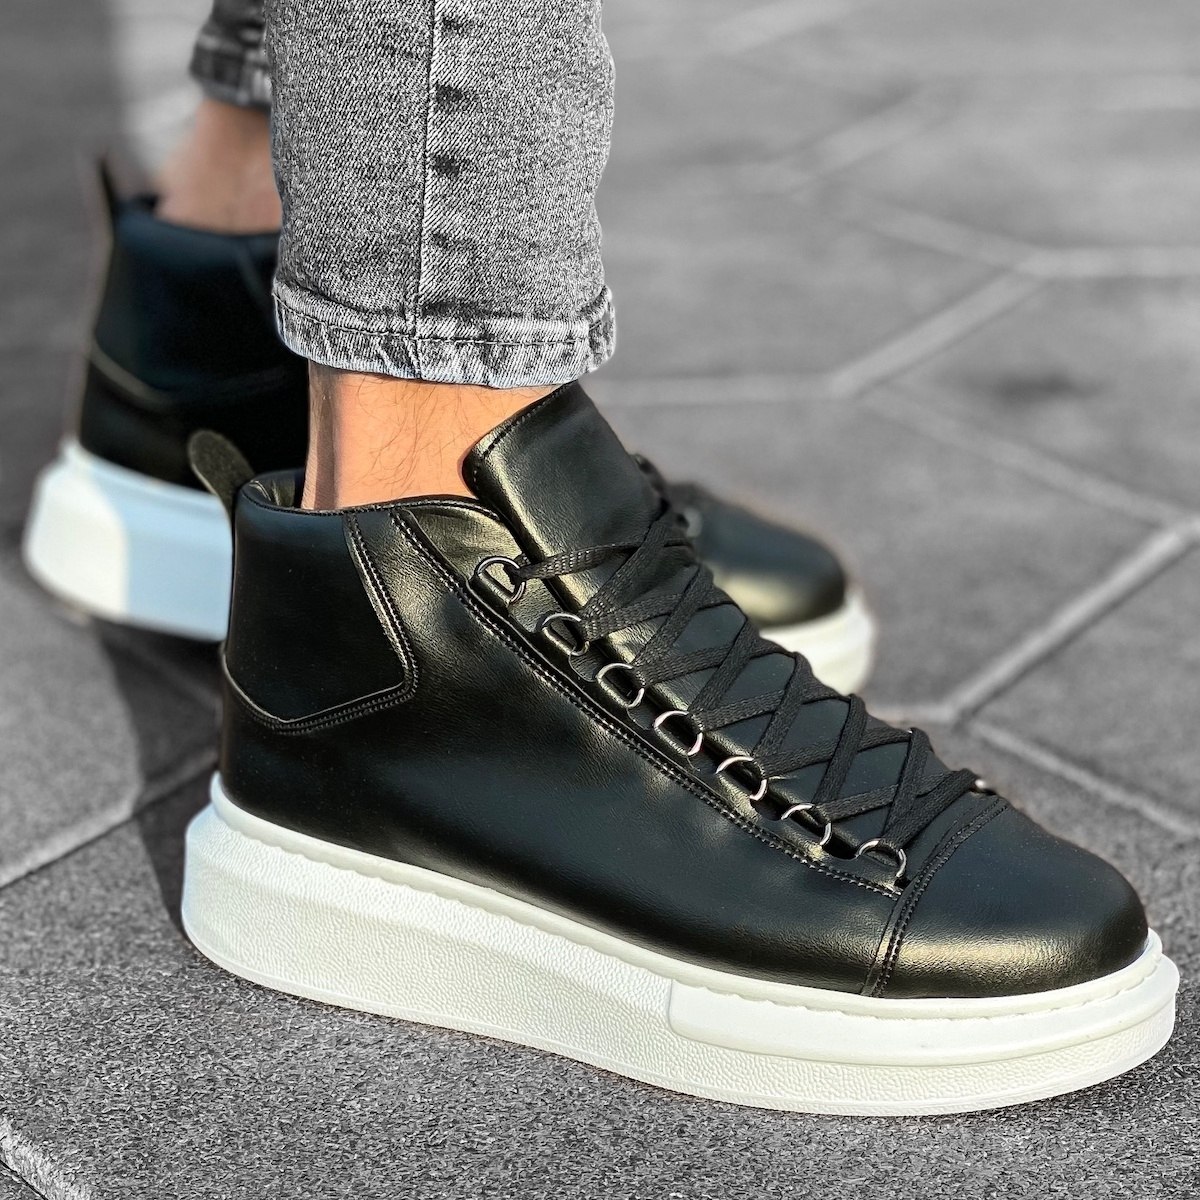 Hype Sole Mox High Top Sneakers In Black | Martin Valen